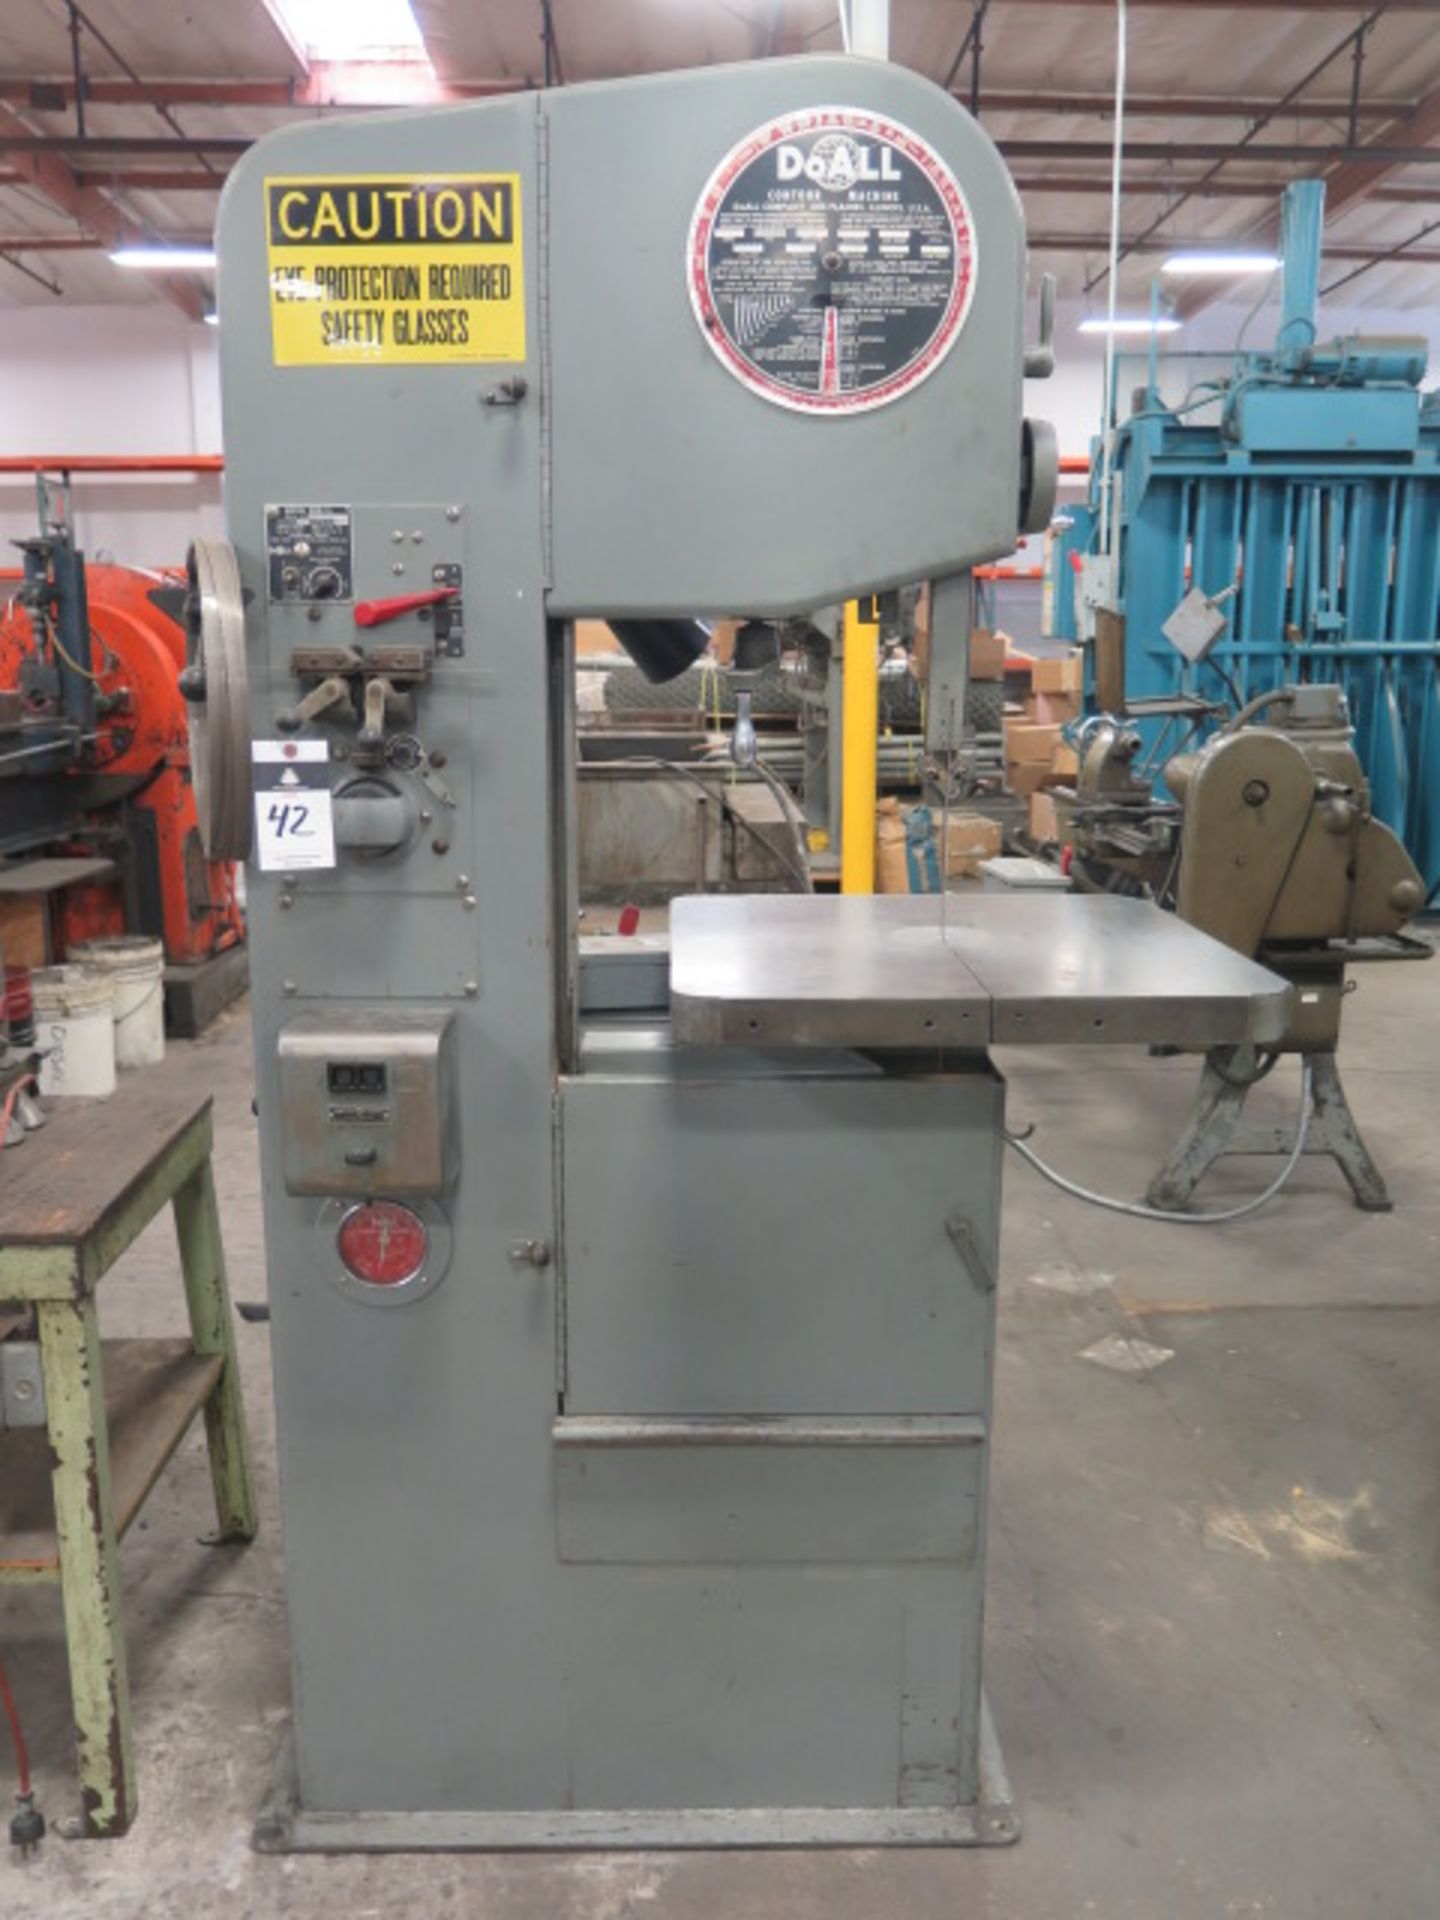 DoAll mdl. 1612-0 16" Vertical Band Saw s/n 277-71981 w/ Blade Welder, 24" x 24" Miter Table